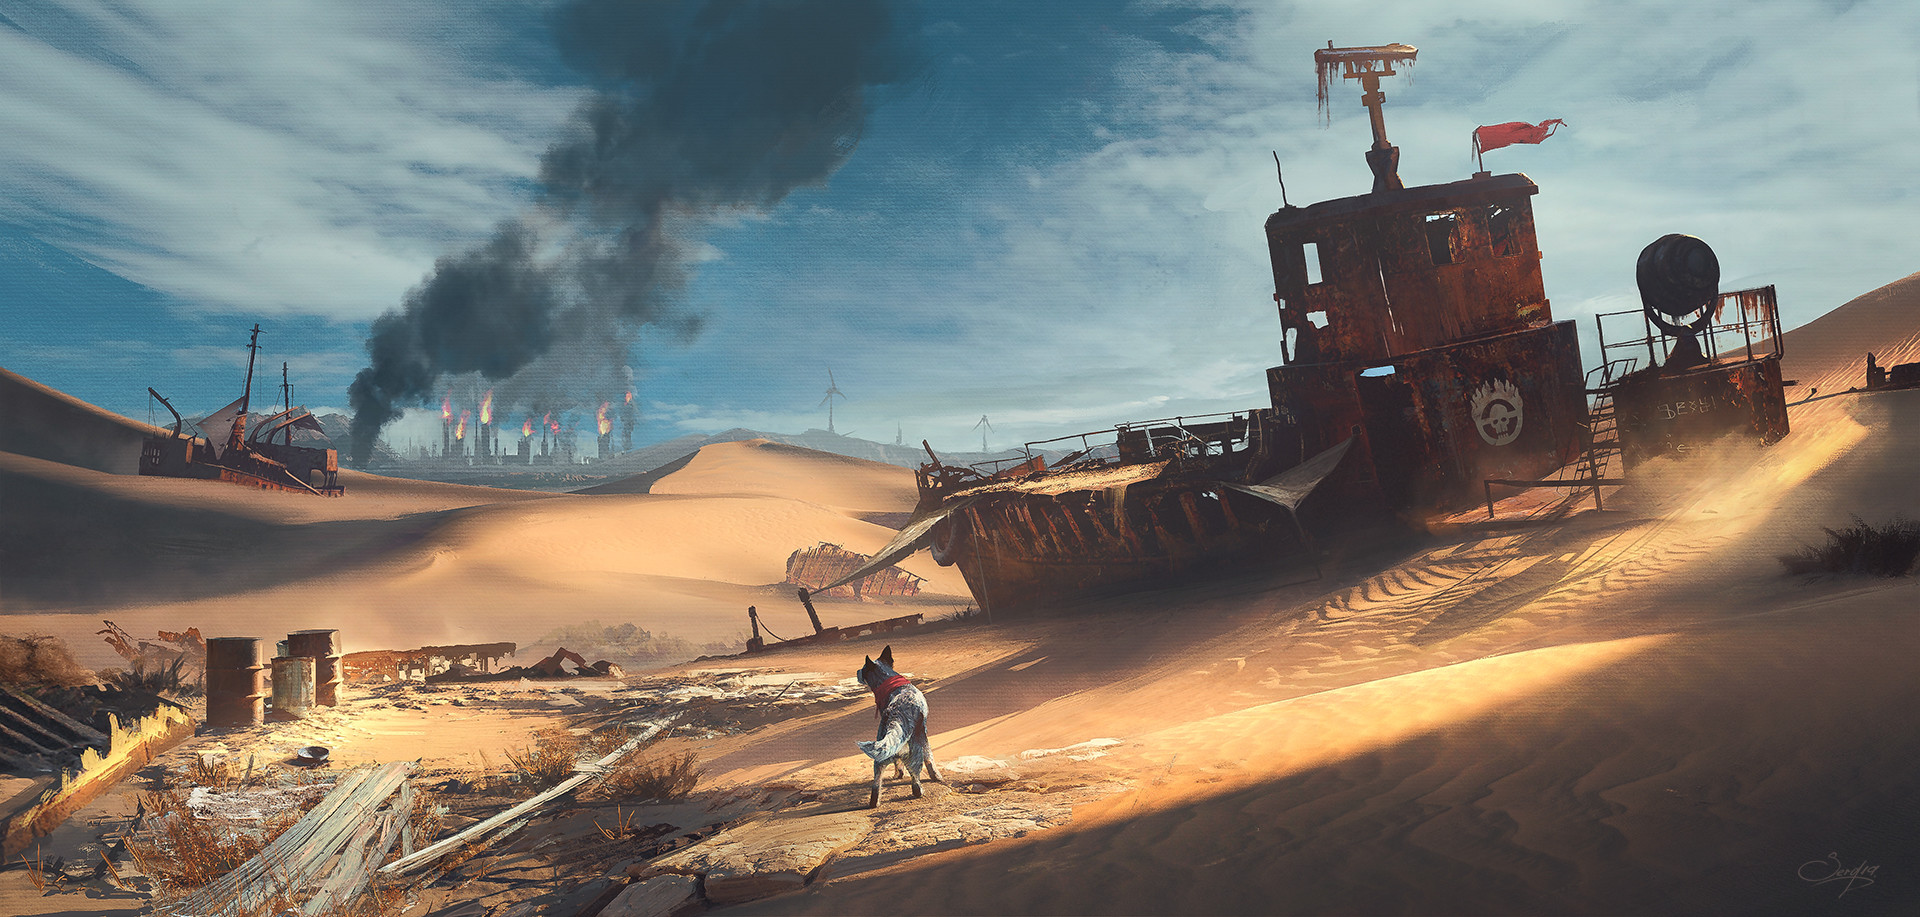 General 1920x917 digital art artwork Mad Max Mad Max (game) video game art video games desert apocalyptic